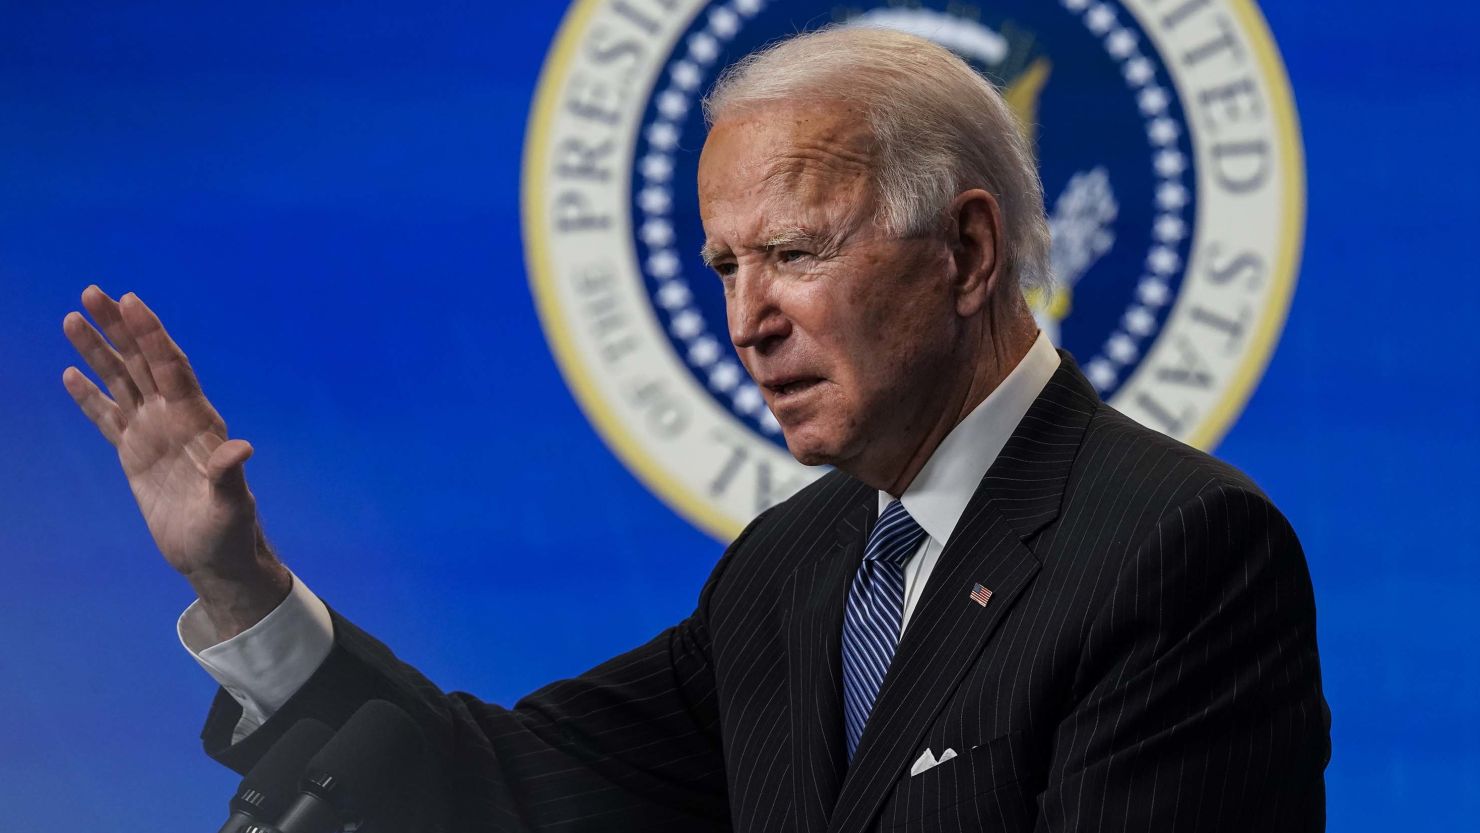 Biden speaks in the South Court Auditorium of the White House complex on January 25, 2021 in Washington, DC. 